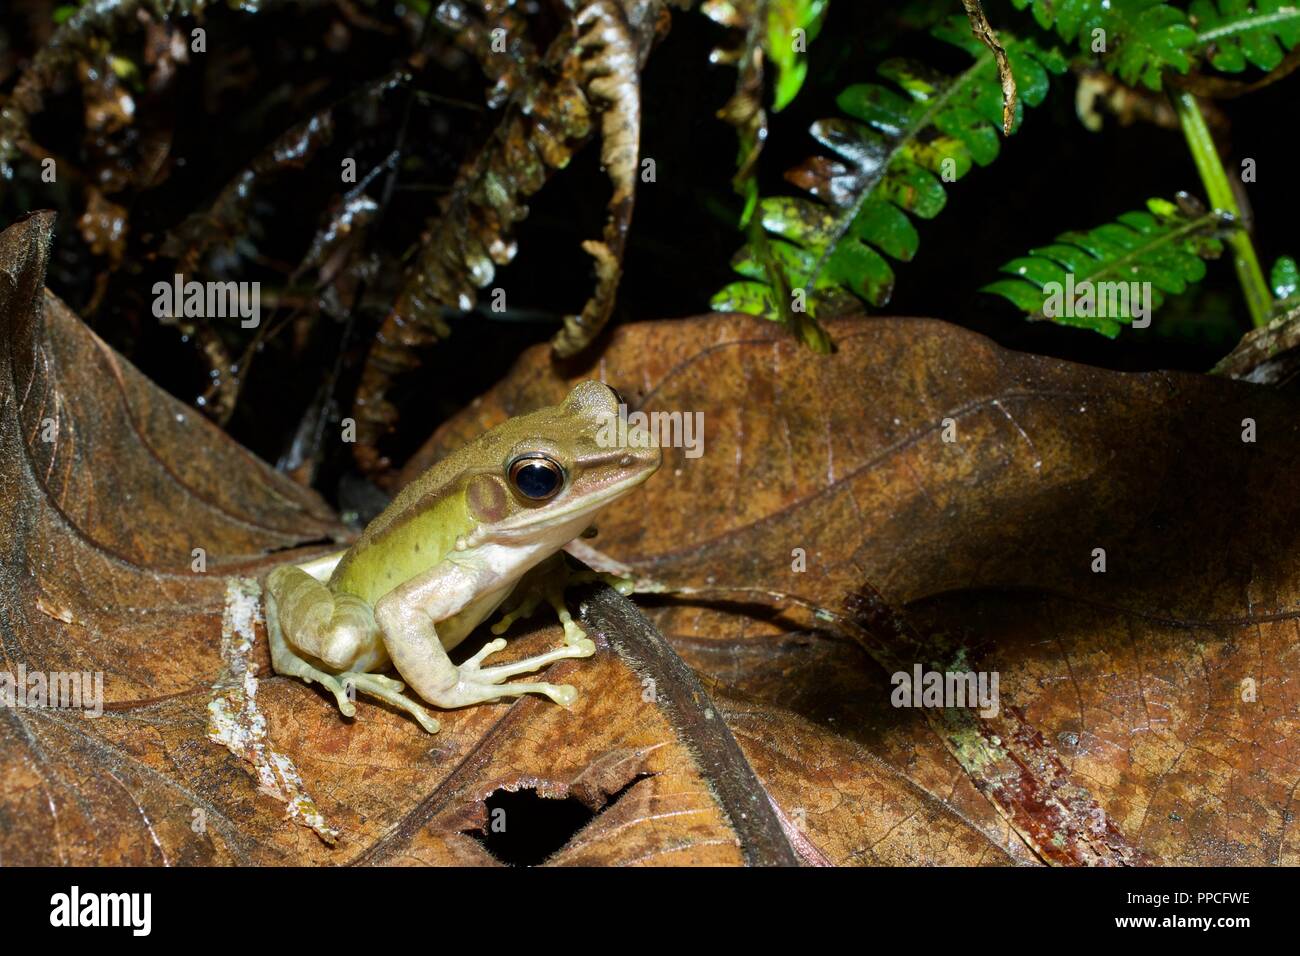 A Forest White-lipped Frog (Amnirana albolabris) resting on a large wet brown leaf in Atewa Range Forest Reserve, Ghana, West Africa Stock Photo